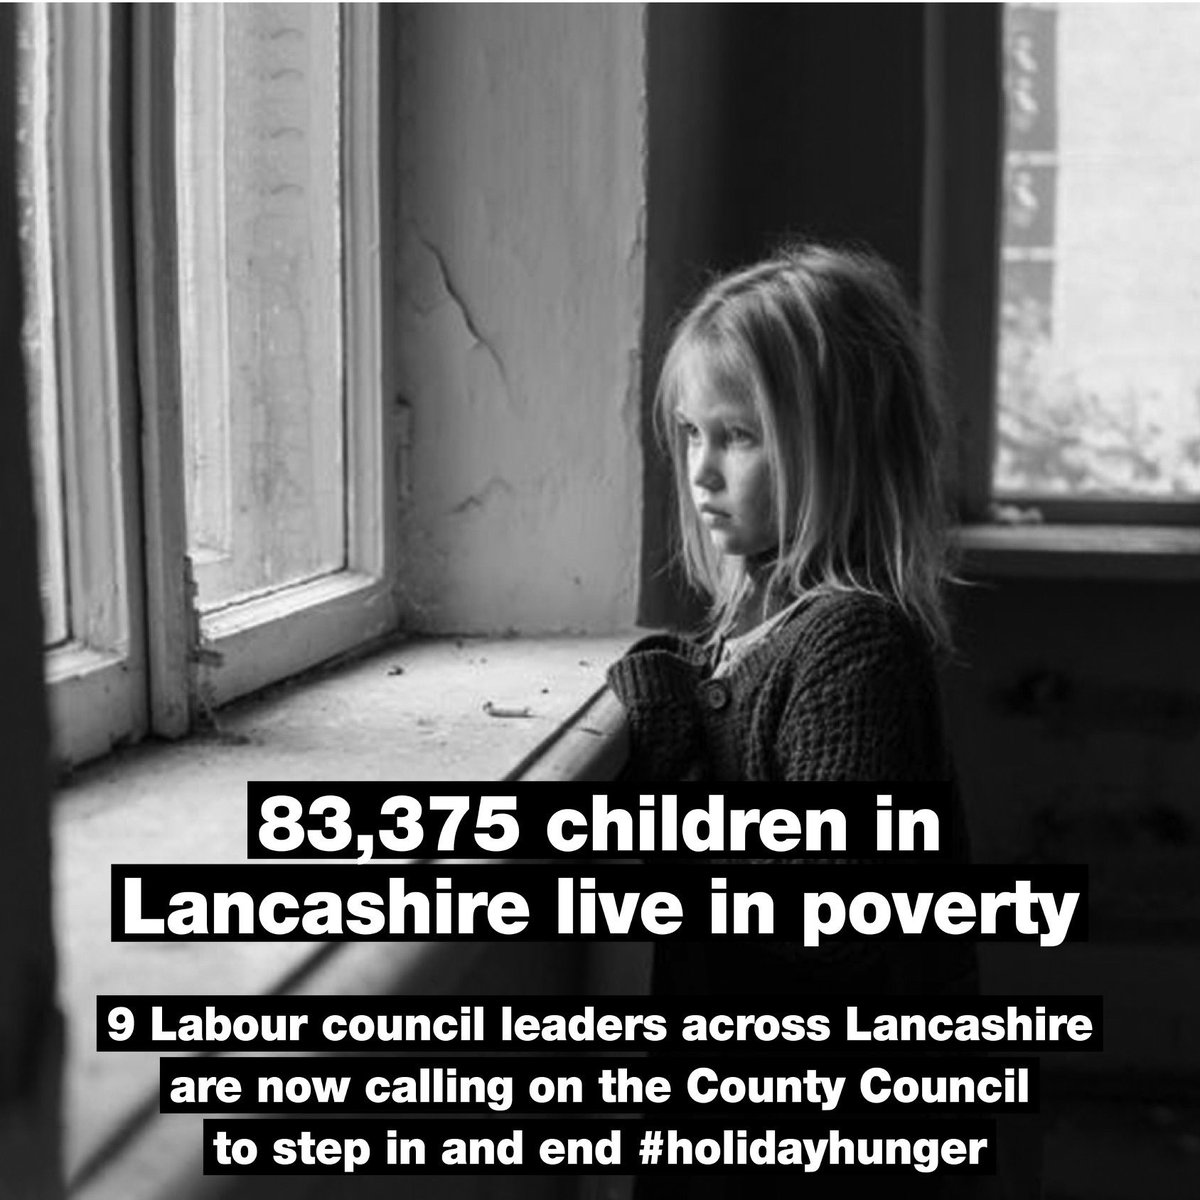 Warning over 'record levels' of child poverty in East Lancashire

With 83,375 children in Lancashire living in poverty, nine Labour council leaders across Lancashire have written to Conservative leader Geoff Driver calling on the County Council to step in and end #holidayhunger.